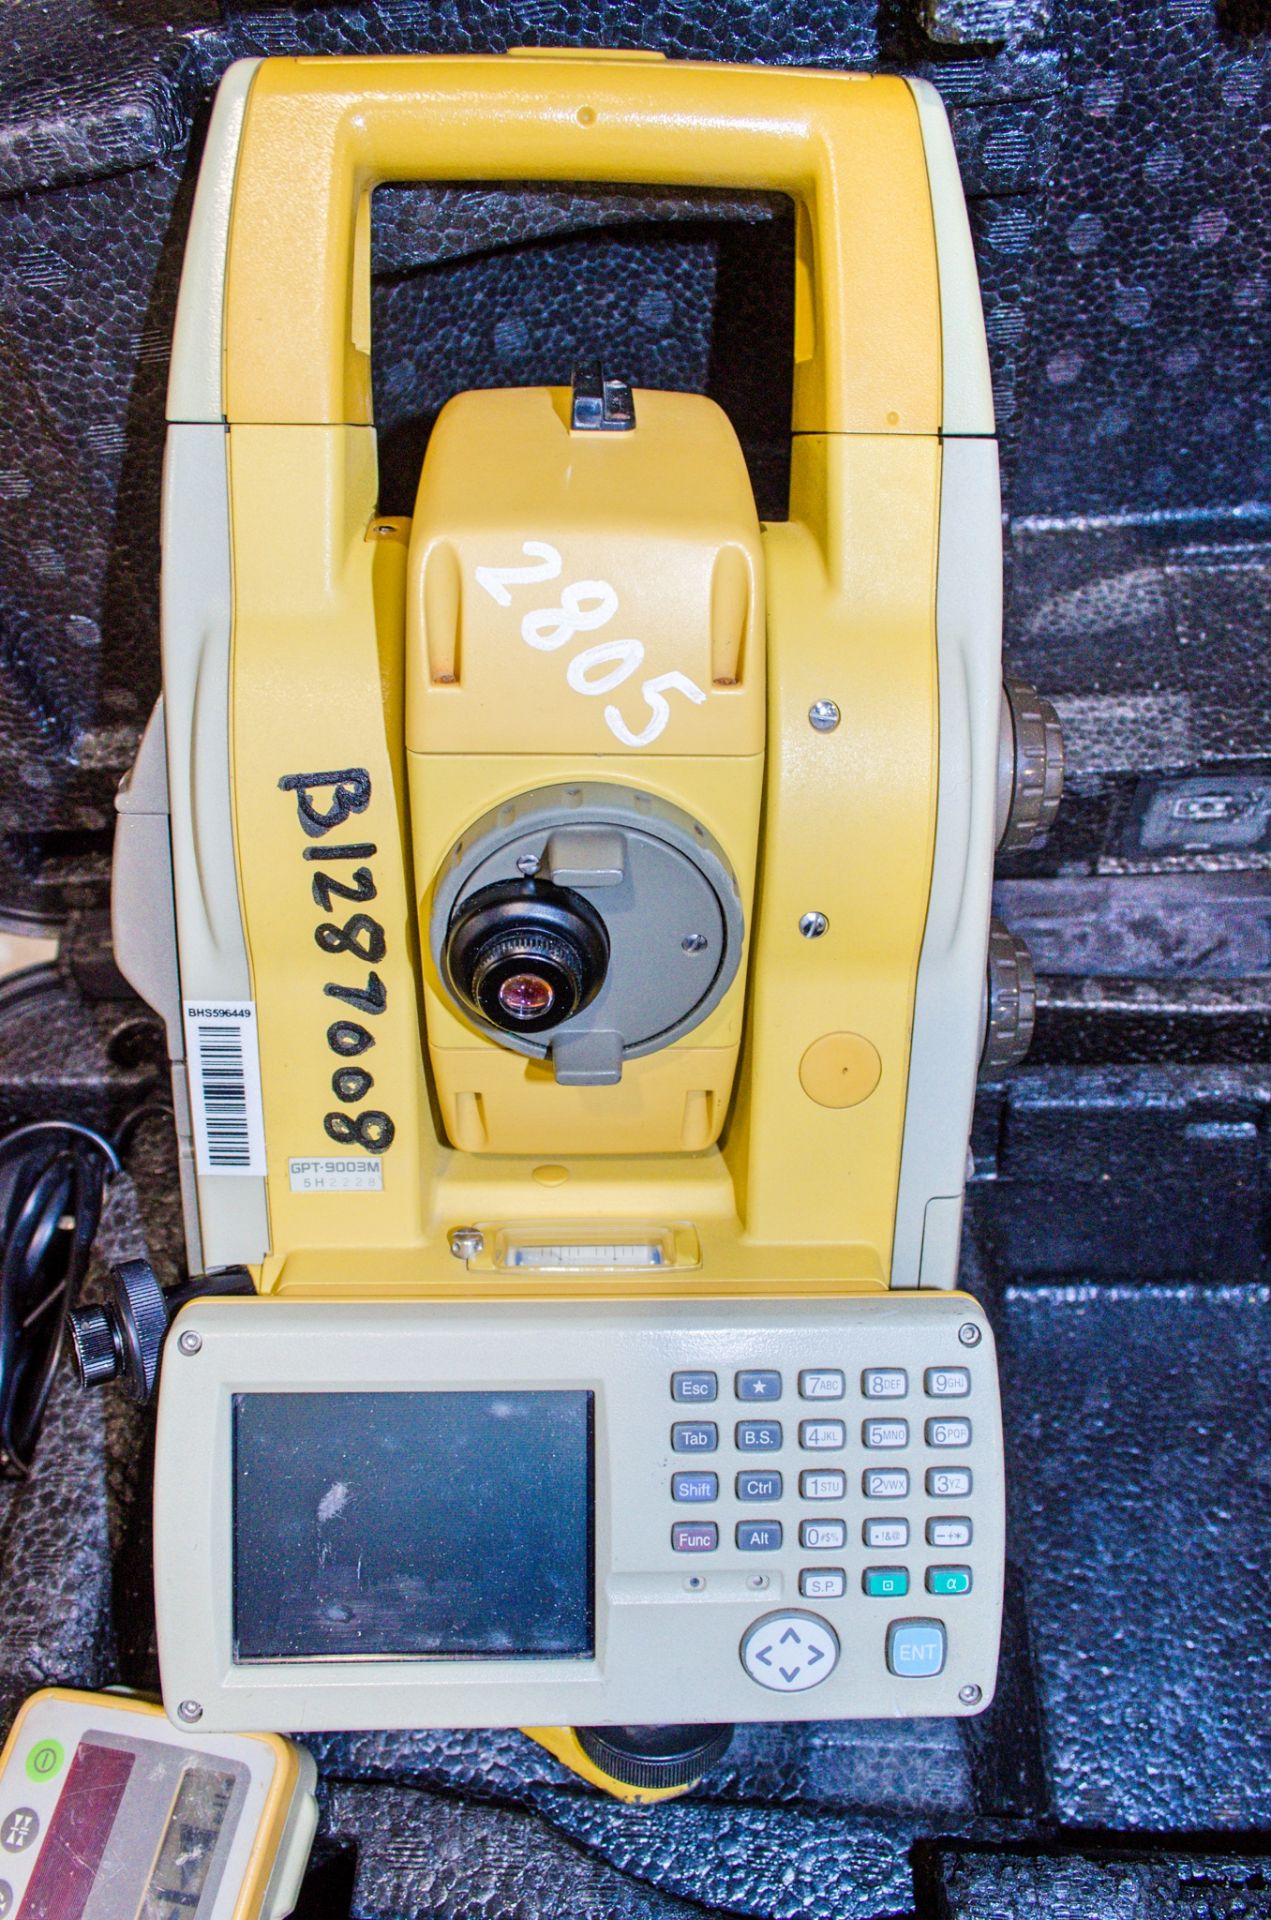 Topcon GPT 9003M total station c/w charger, battery - Image 2 of 3